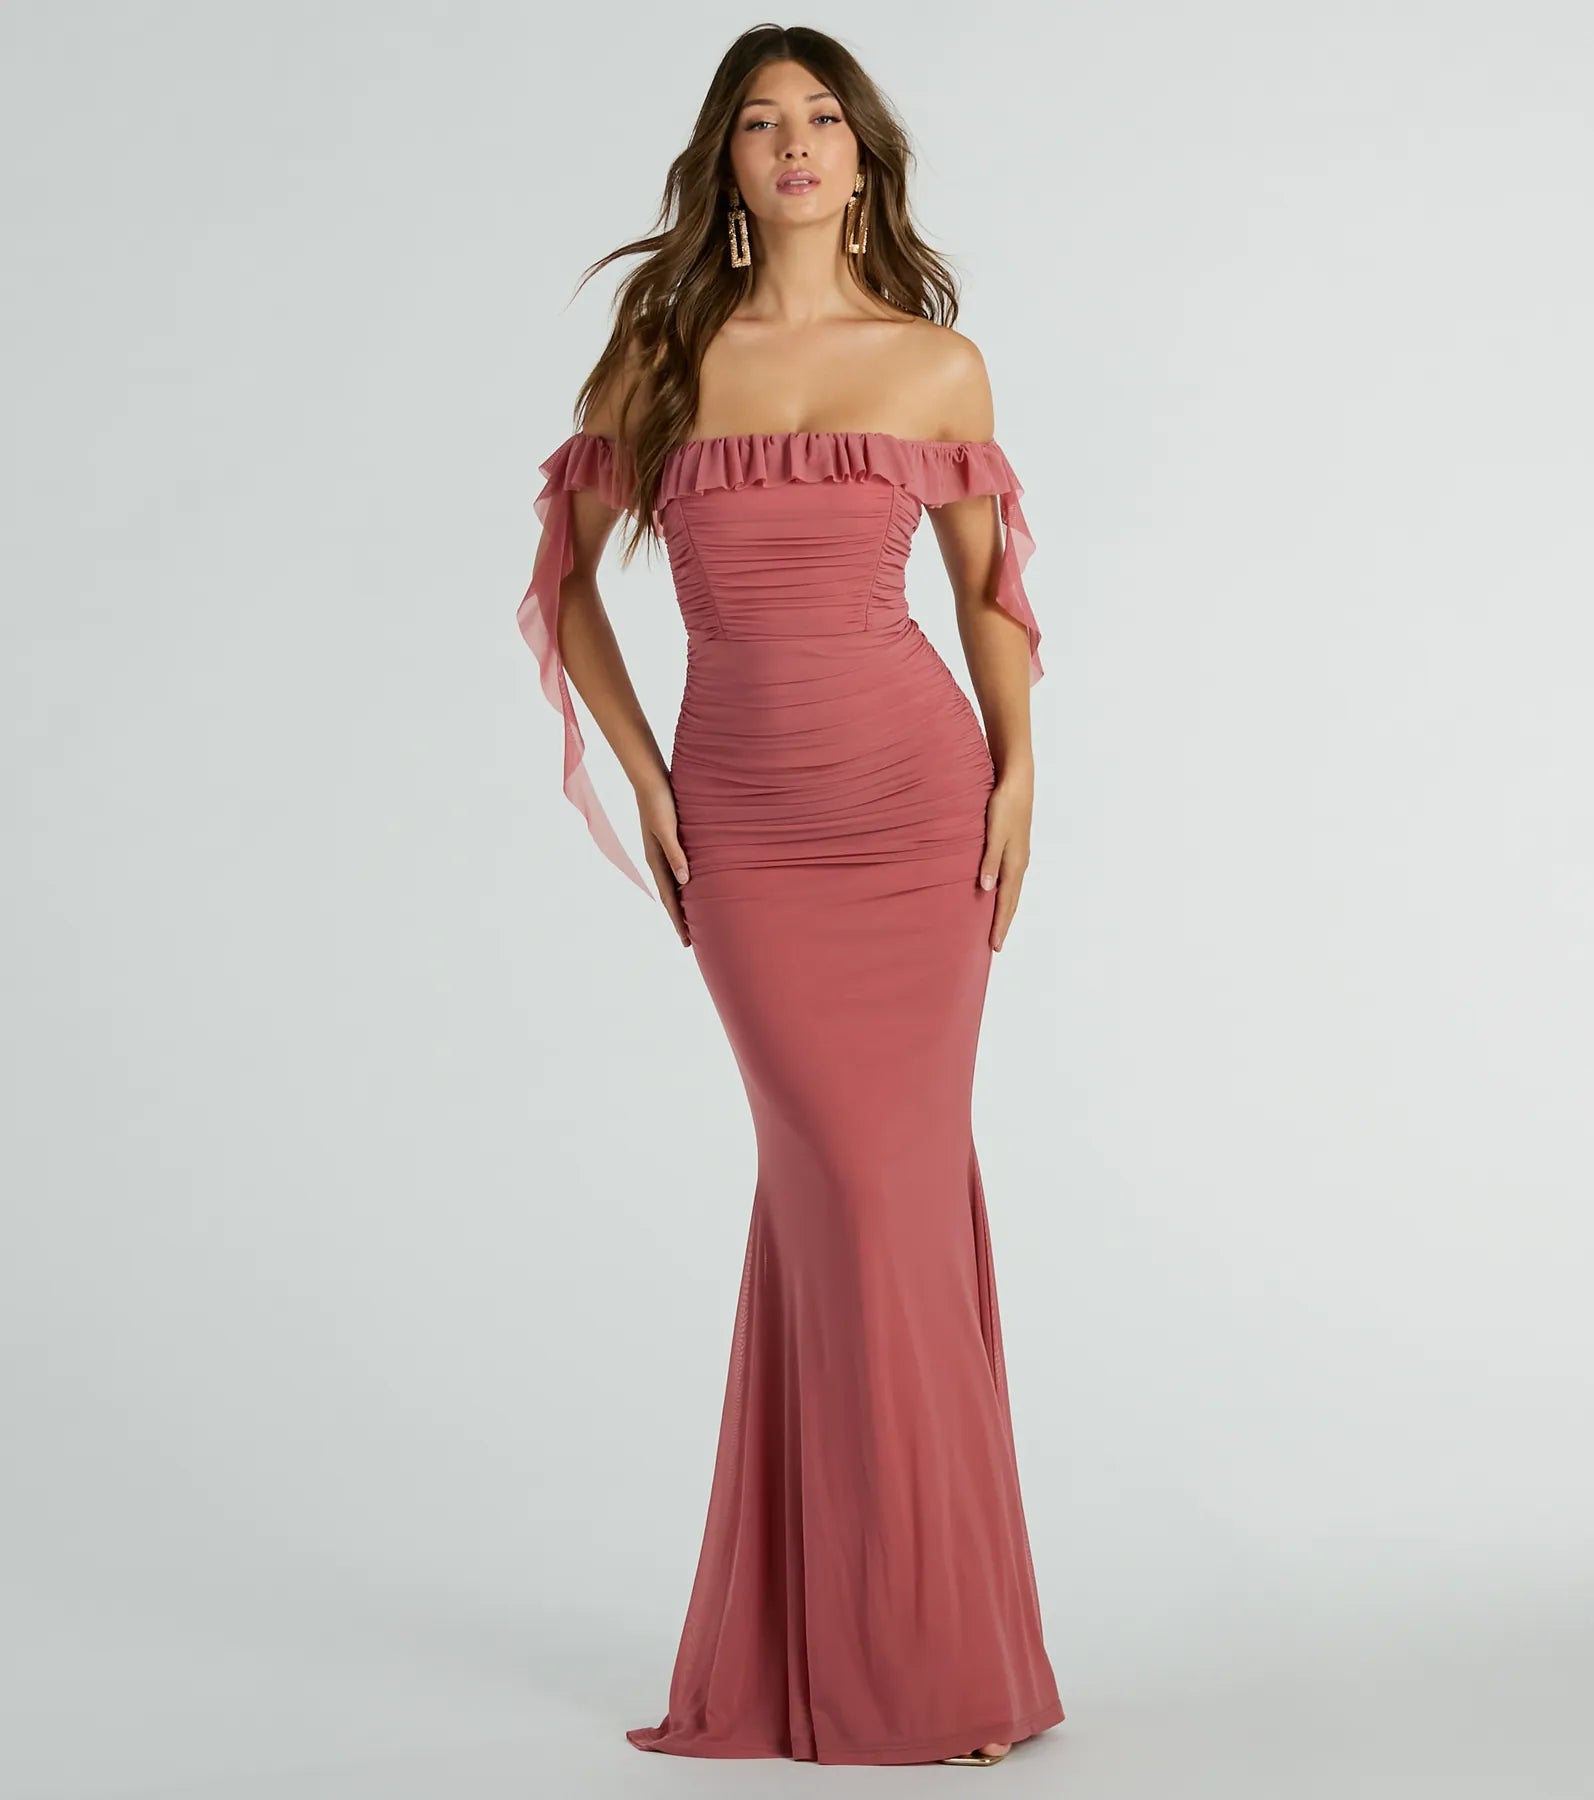 Sexy Sophisticated Mermaid Off the Shoulder Knit Ruched Stretchy Mesh Maxi Dress With Ruffles